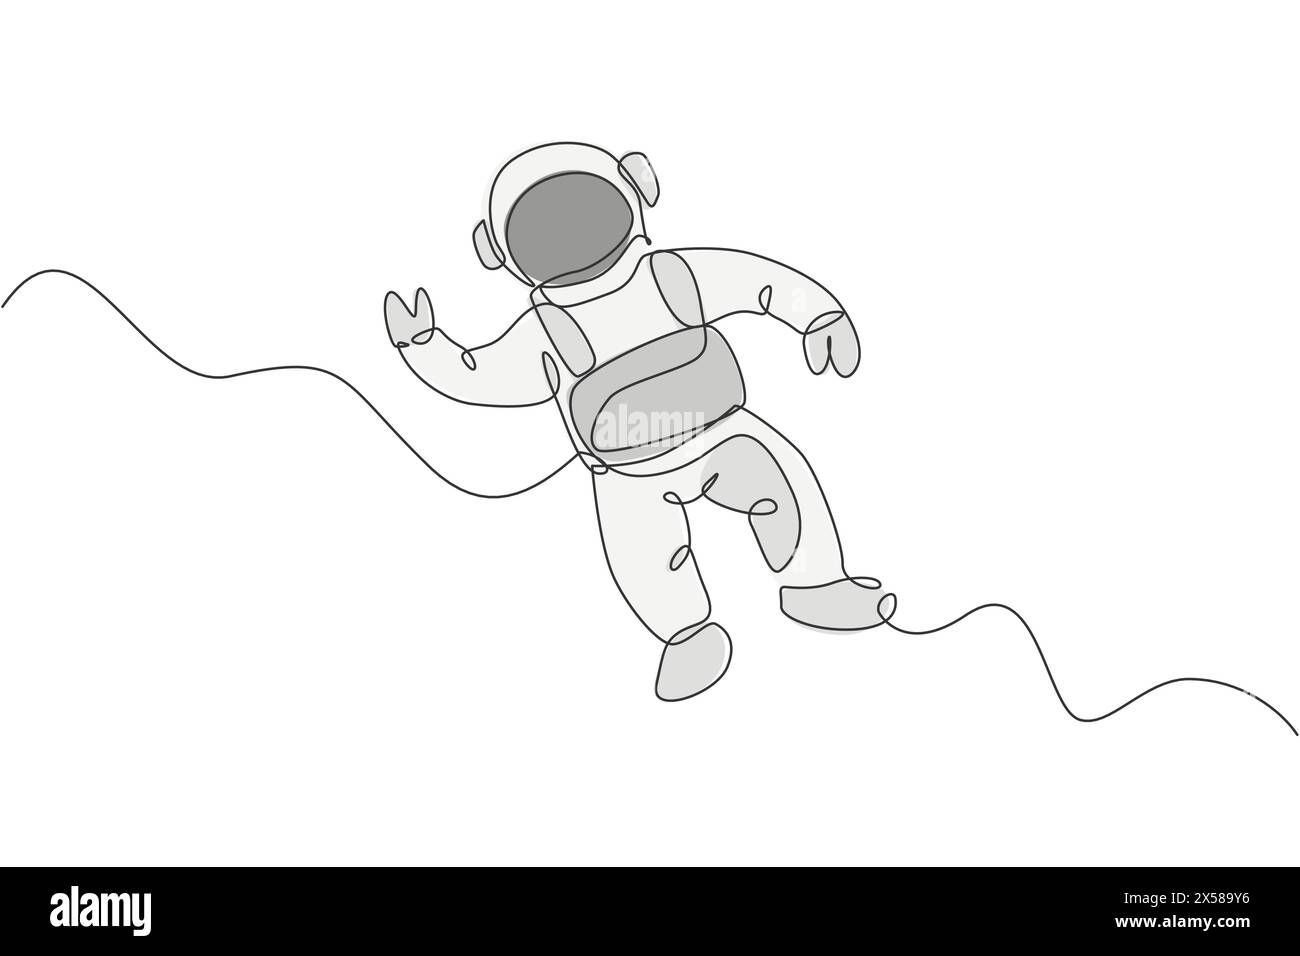 Single continuous line drawing of young cosmonaut scientist discovering spacewalk universe in vintage style. Astronaut cosmic traveler concept. Trendy Stock Vector